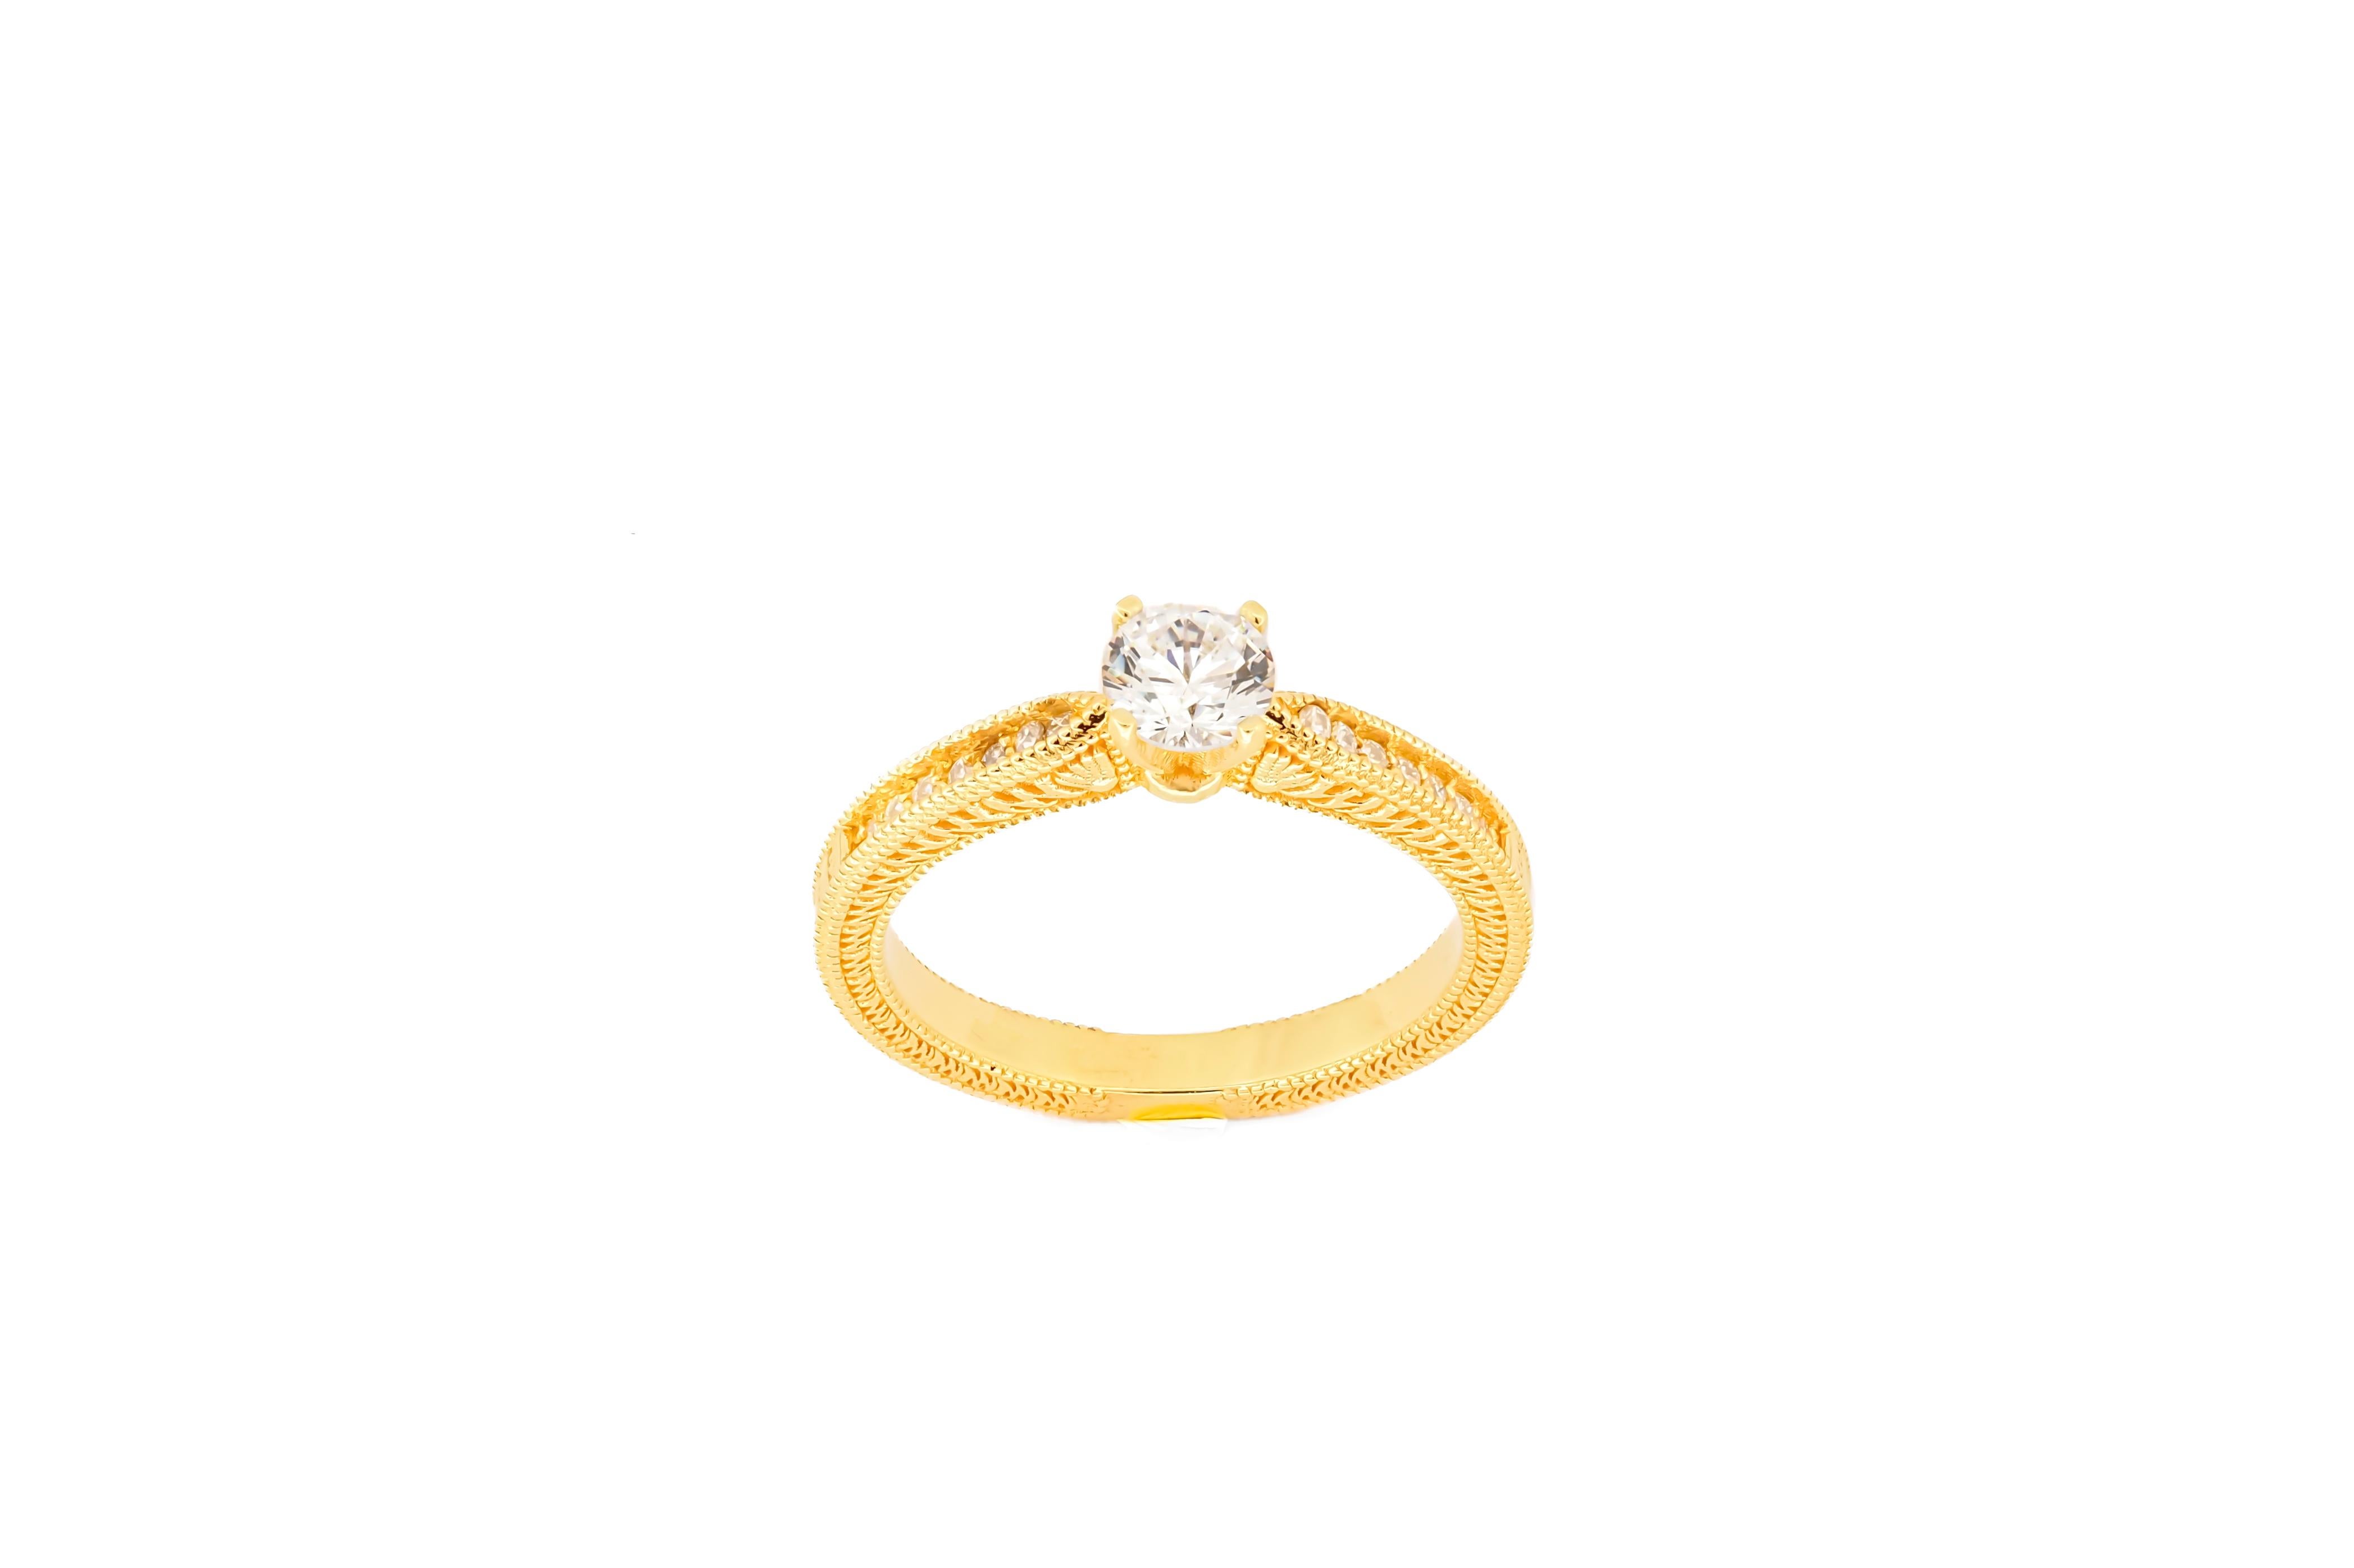 1 ct moissanite 14k gold engagement ring. Moissanite gold ring. Round moissanite gold ring.  Vintage style moissanite ring.  Diamond halo engagement ring. Solitaire moissanite ring.

Metal: 14k gold
Weight: 2.5 gr depends from size
1 piece (central